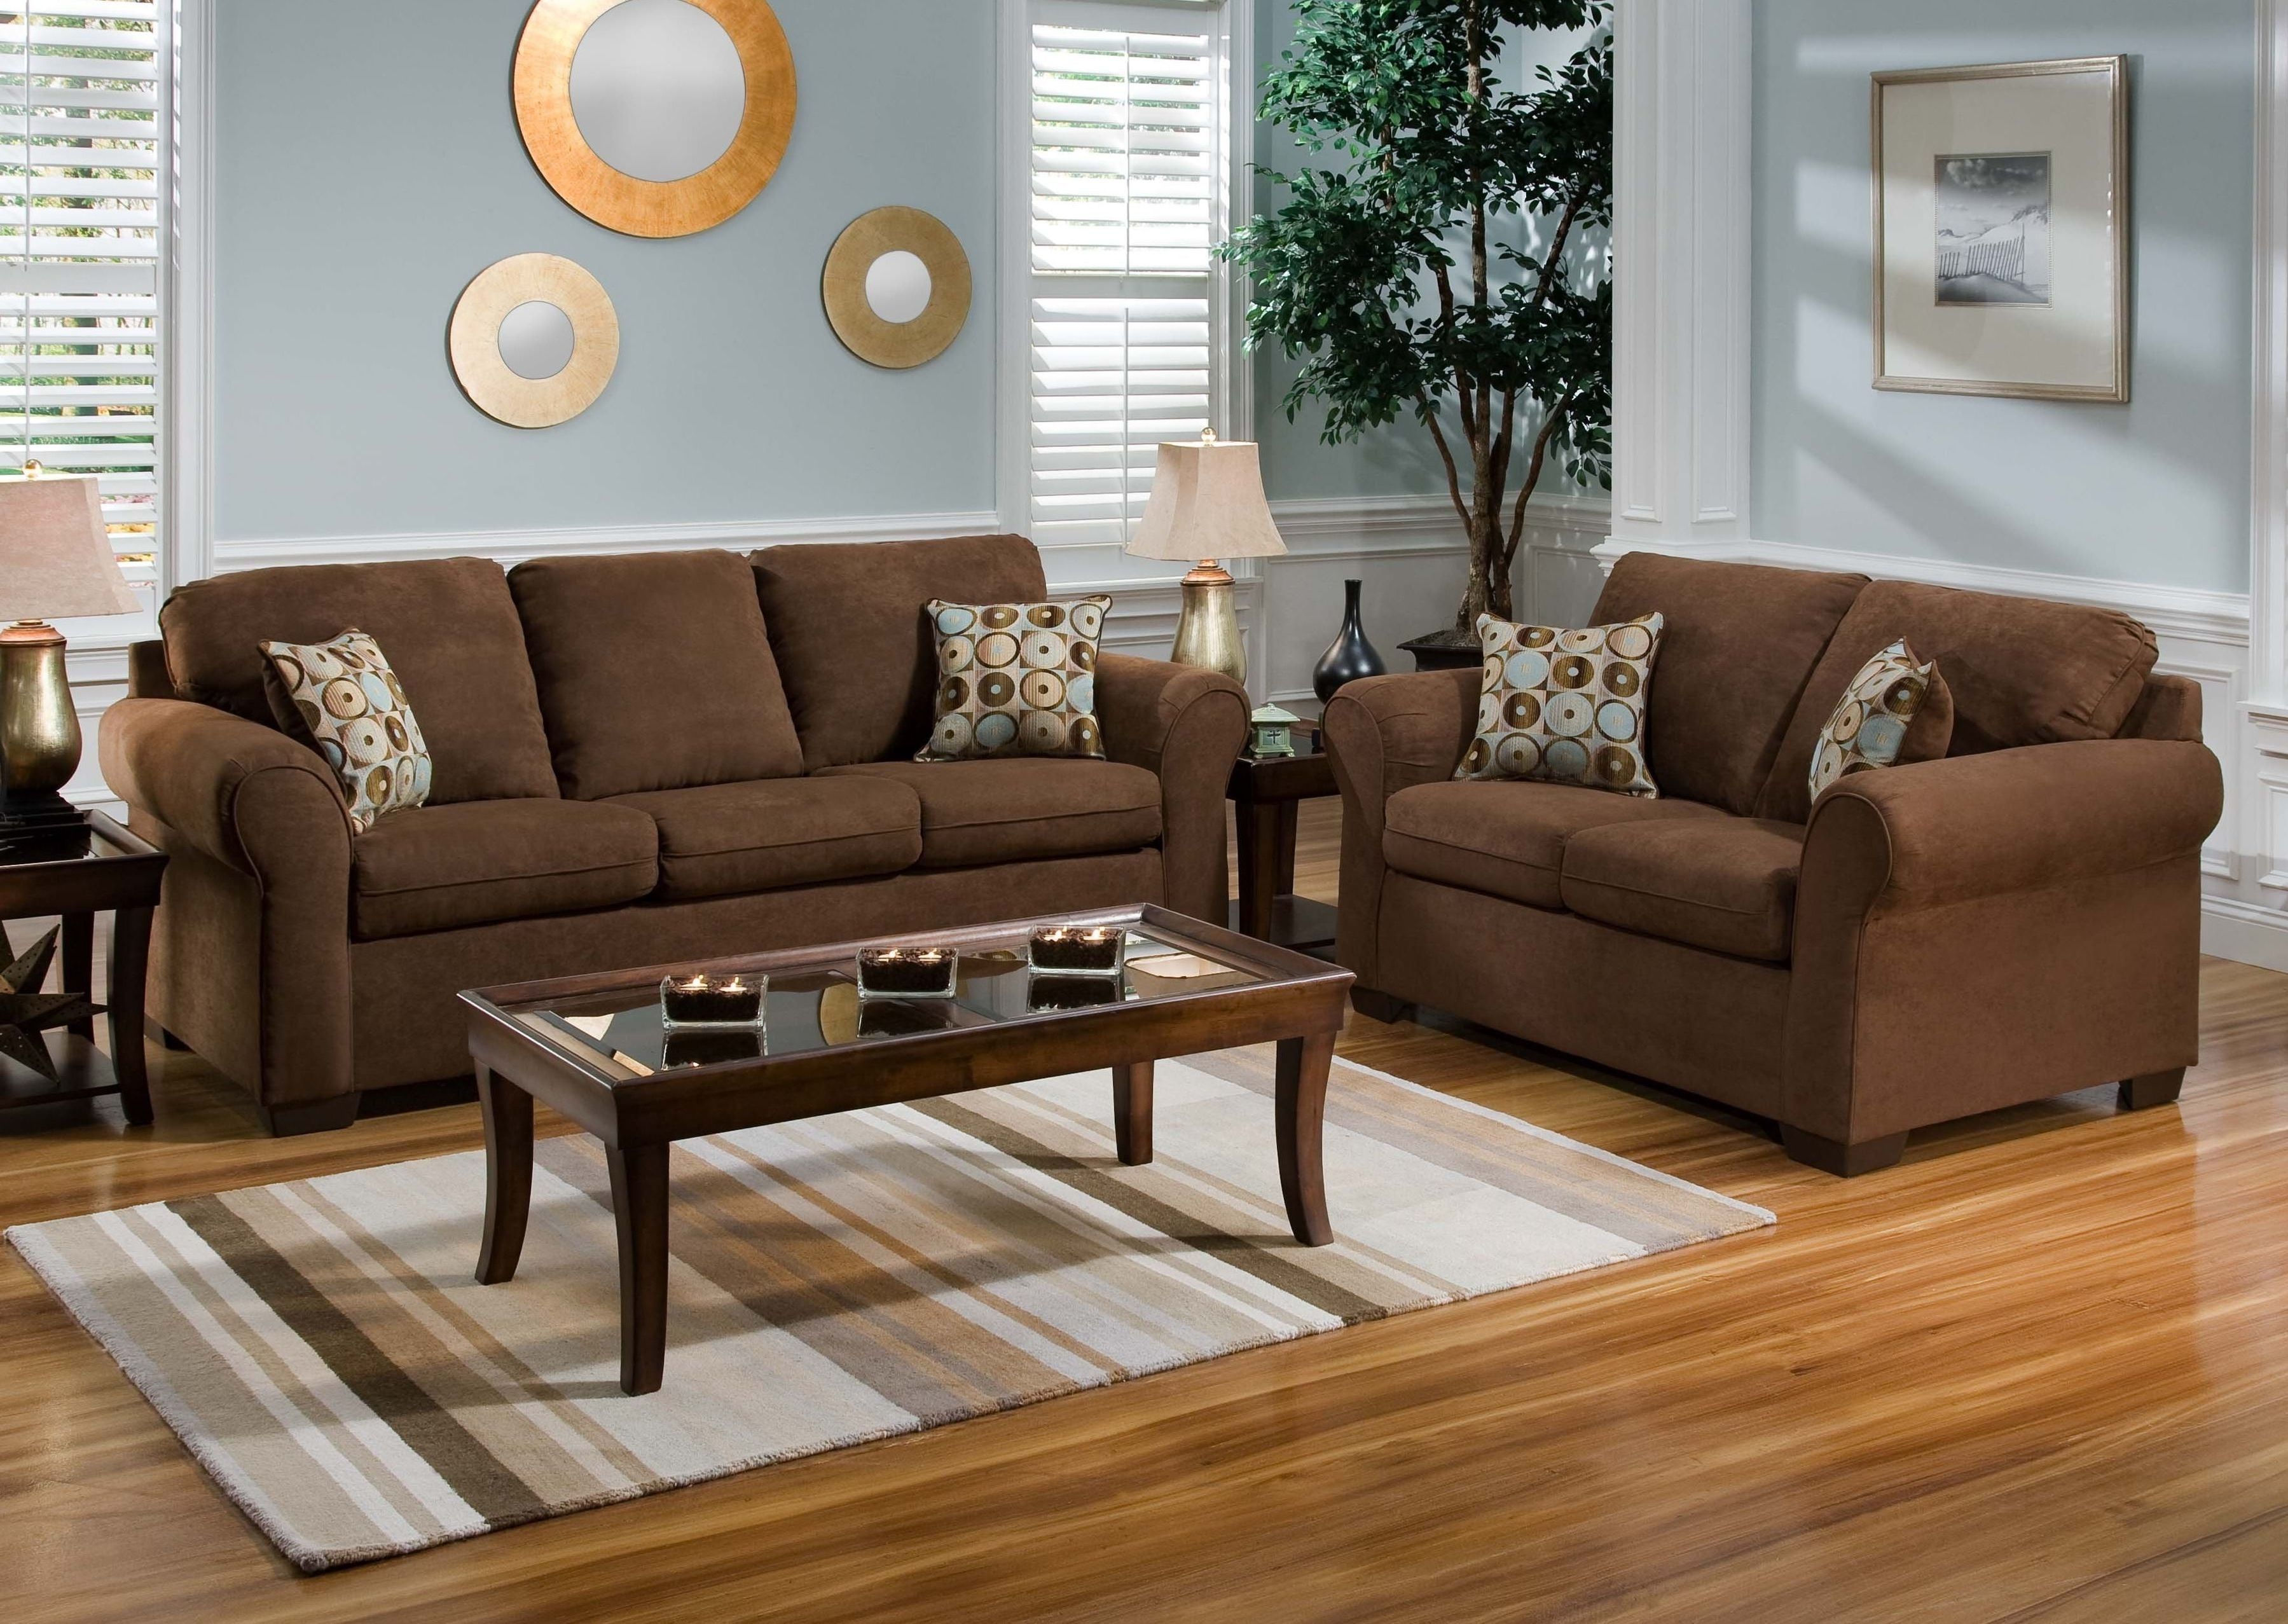 Color For Living Room With Brown Furniture